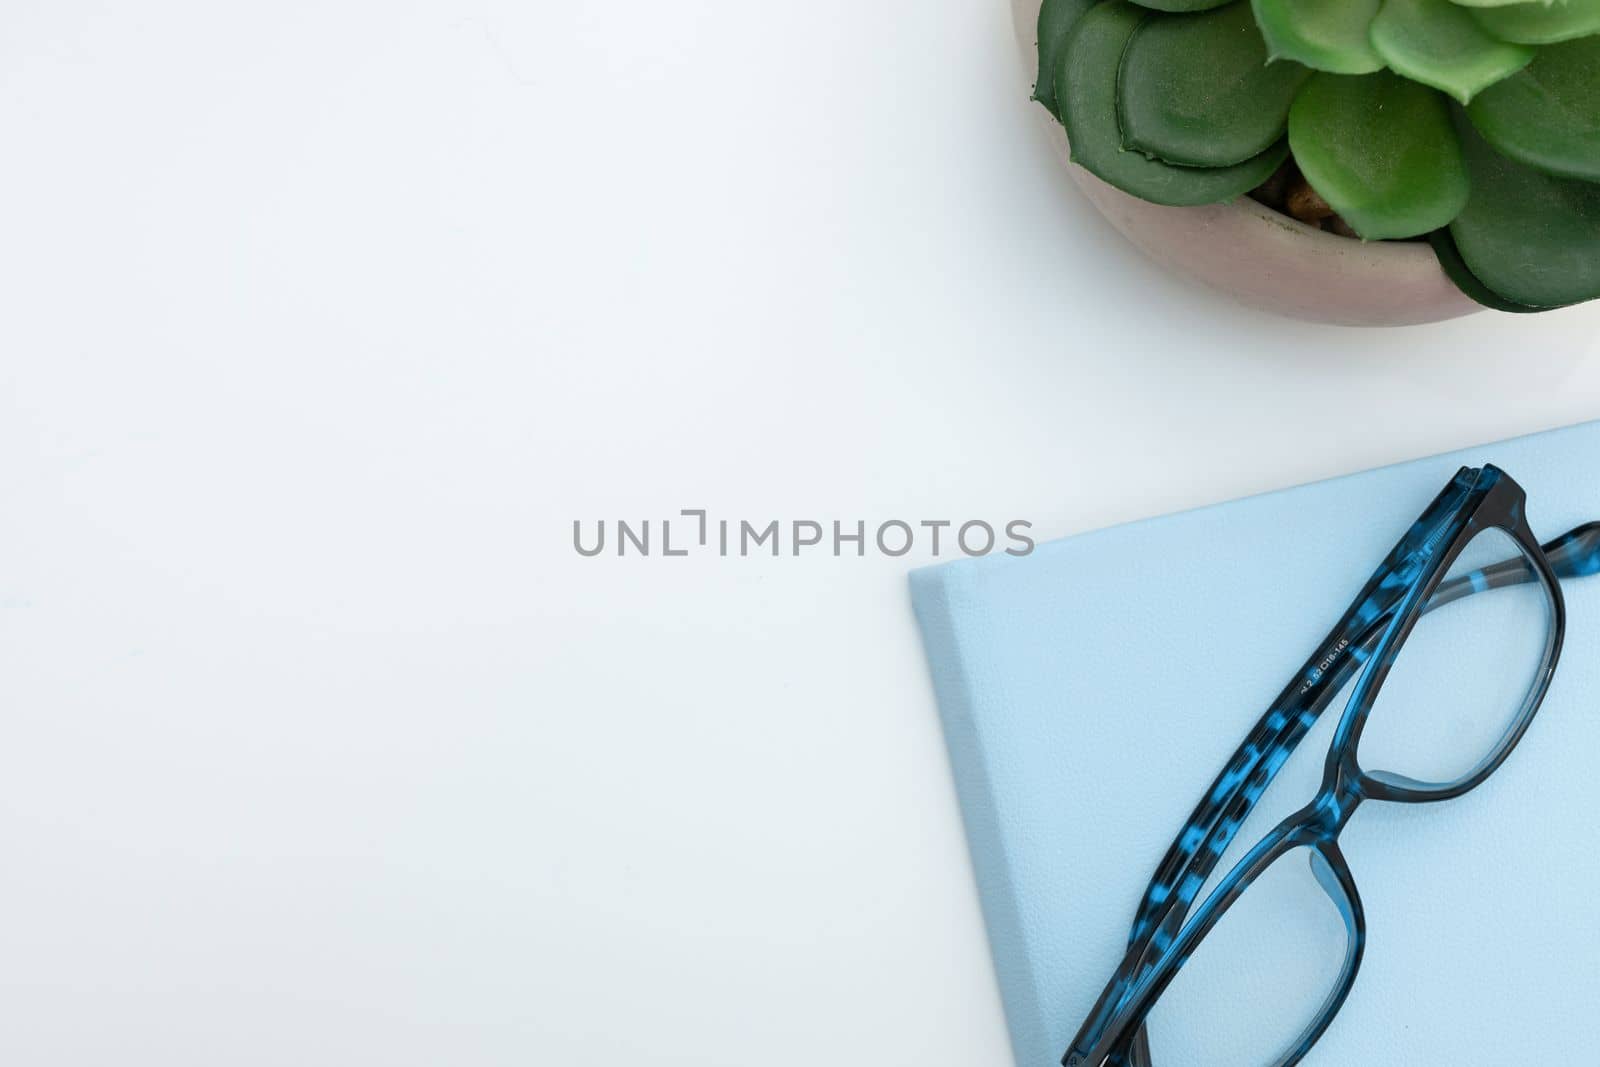 Office Supplies Over Desk With Keyboard And Glasses And Coffee Cup For Working Remotely, Assorted School Utilities For Studying With Hot Drink And Eyeglasses. by nialowwa